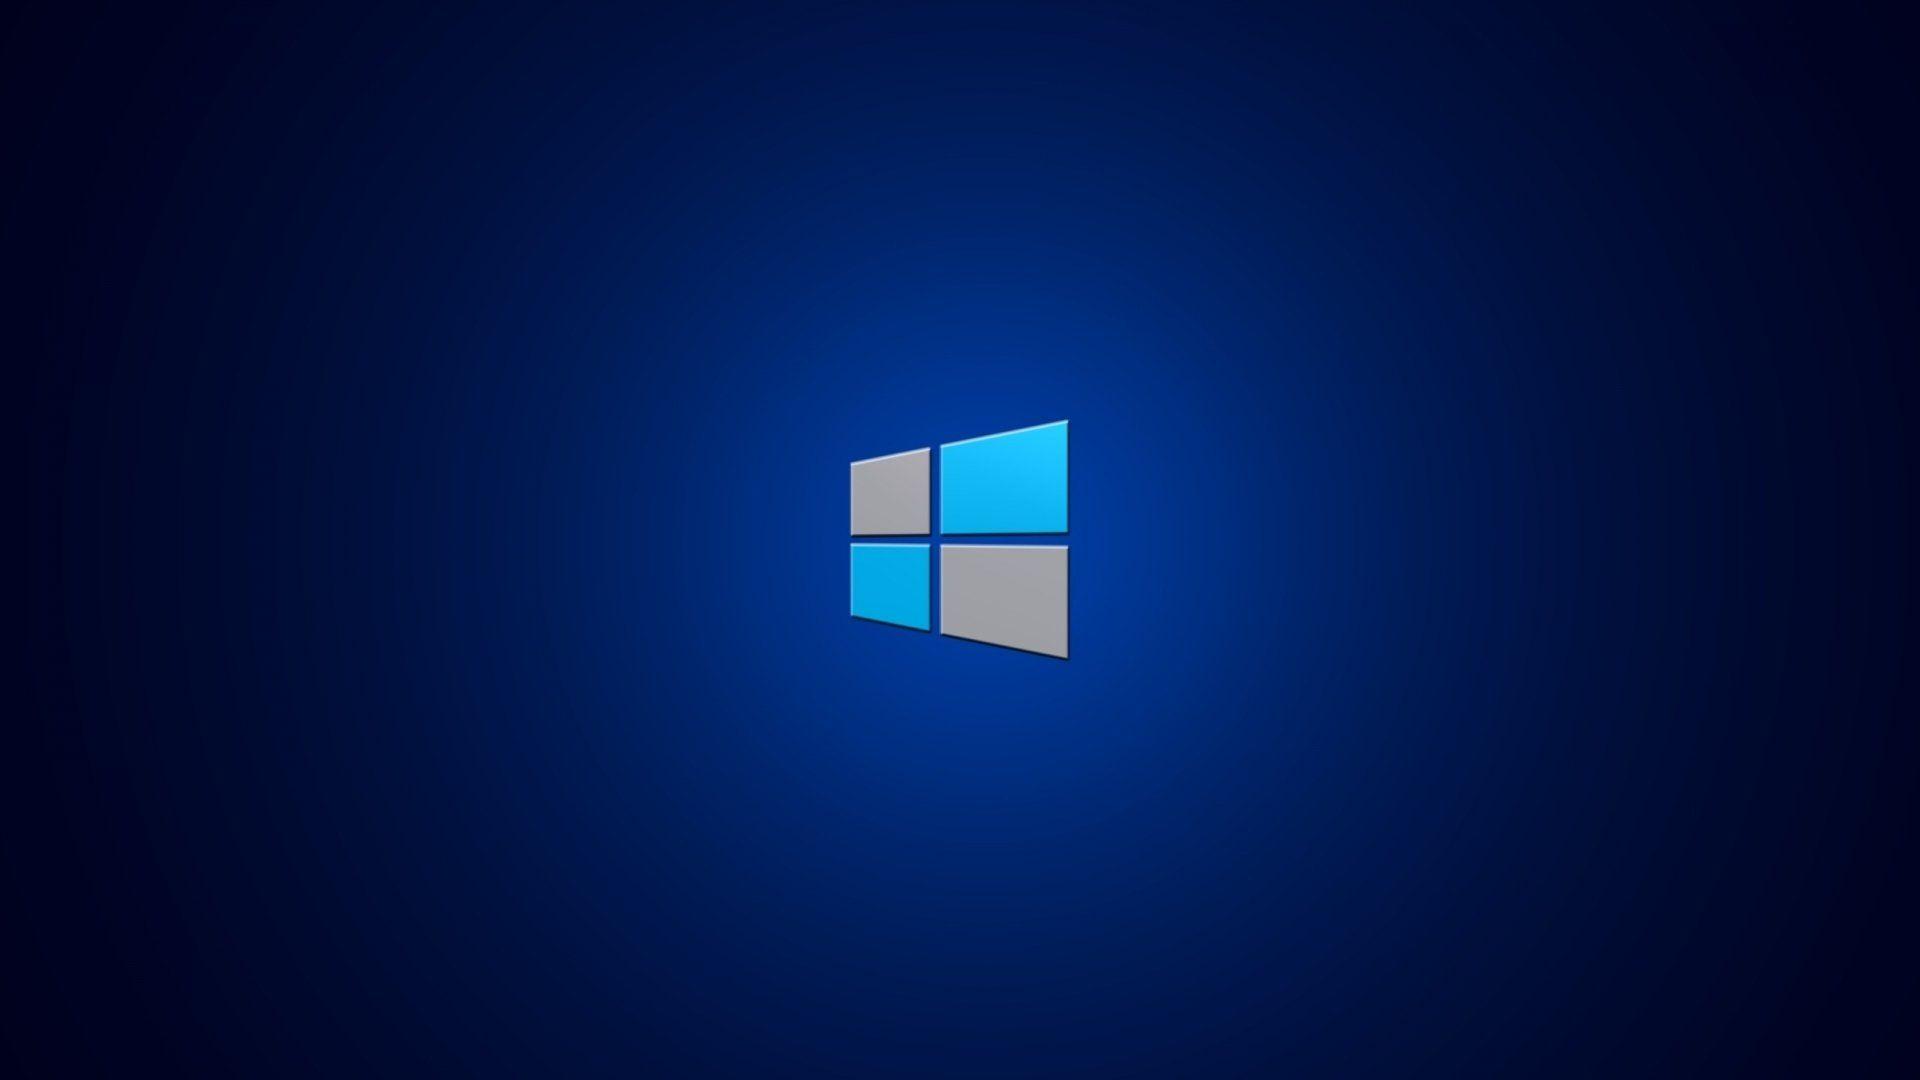 Windows 8 HD Wallpaper and Background Image